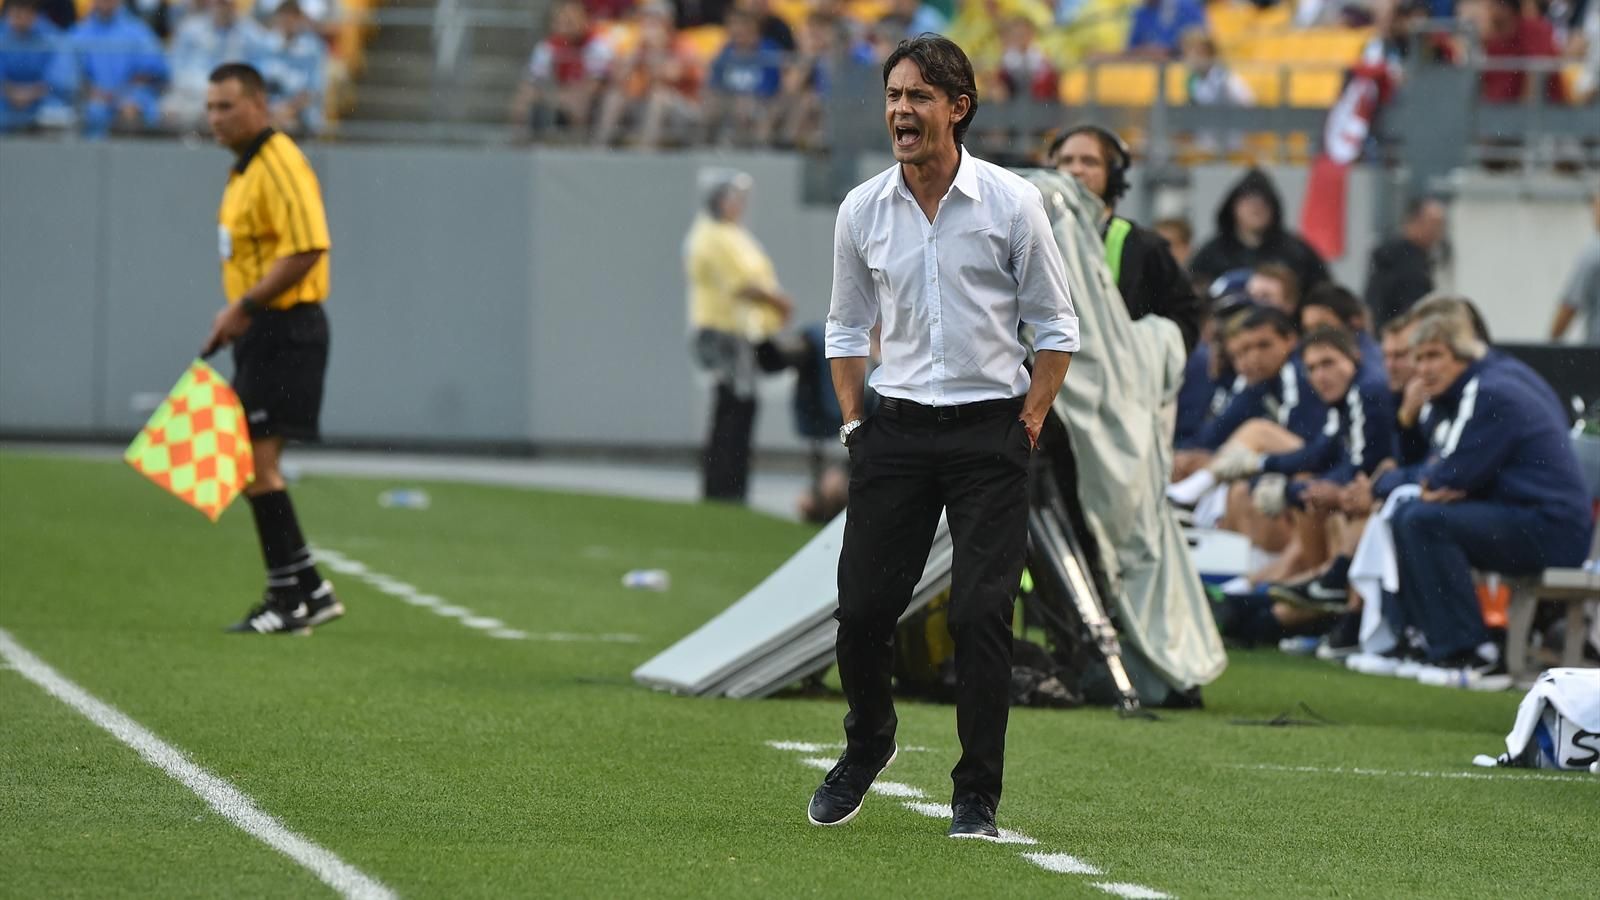 Inzaghi Ecstatic That Benevento Will Be Promoted to Serie A Next Season